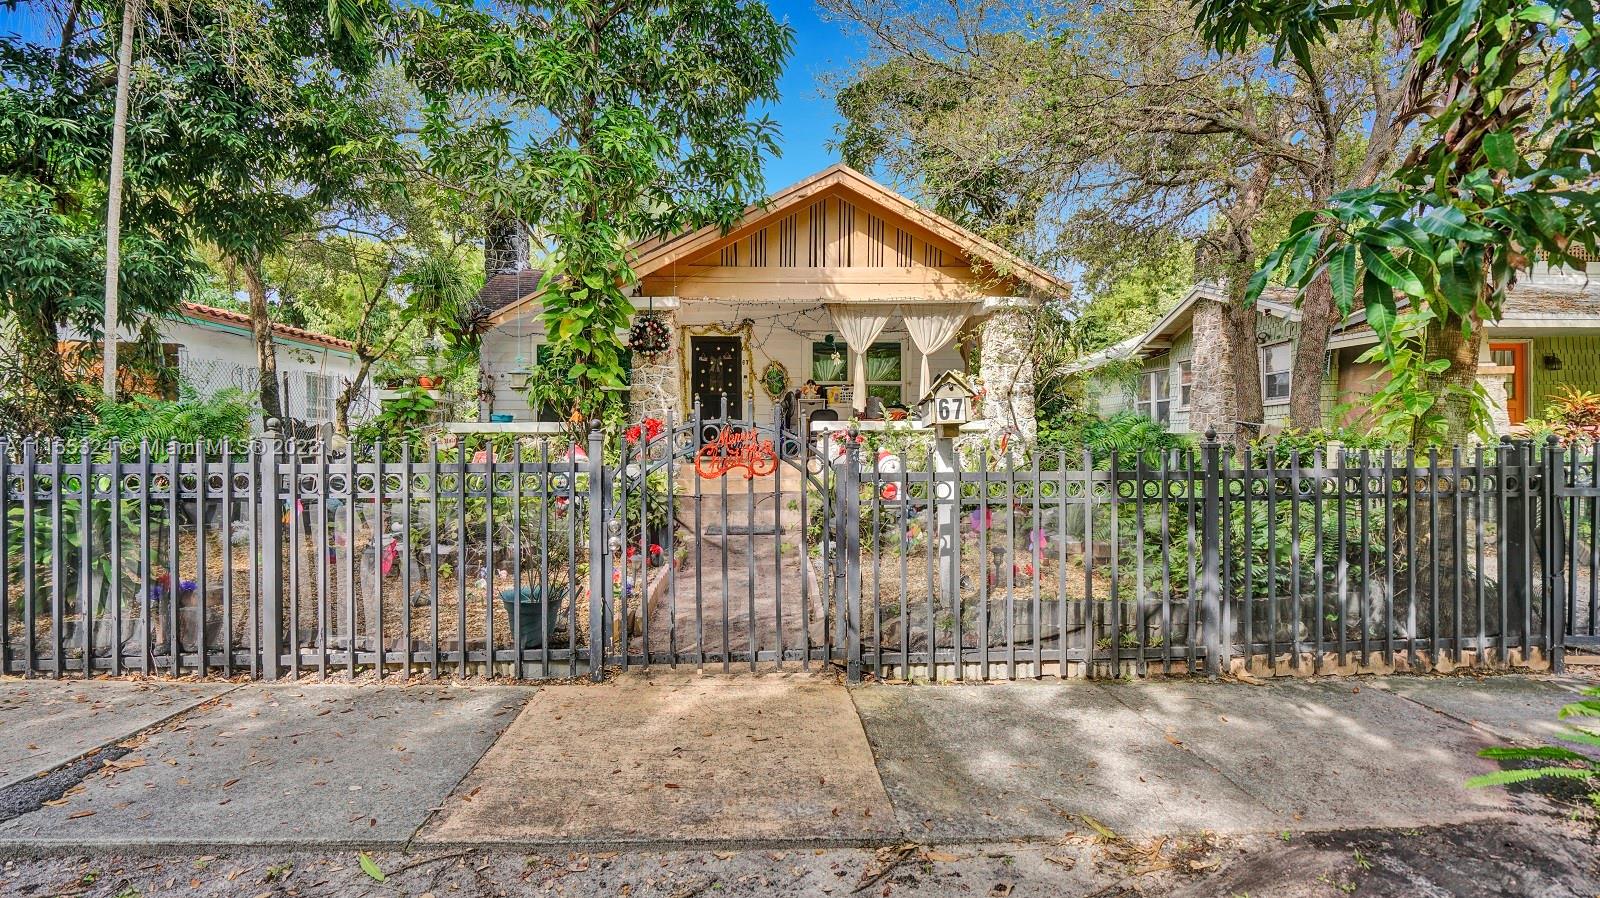 Do you love artistry, workmanship, & a connection to the past? Can you blend the old with the new & make something awe-inspiring? Come be a part of the historic fabric of this progressive & revitalized area & create your dream home today! Nestled in the Buena Vista East District of NE Miami, this 1924 historically-designated Craftsman Bungalow with great financial upsides makes excellent use of space, interesting details, character, & charm in an almost century-old home. Offerings include: impact windows, a broad and deep front porch with prominent coral rock piers, original fireplace, formal dining room, fruit trees, lush foliage, a peaceful and private backyard, and room for a pool. Close to the Miami Design District, Midtown, Wynnwood, Biscayne Bay, Downtown, Airport, & the Beaches.